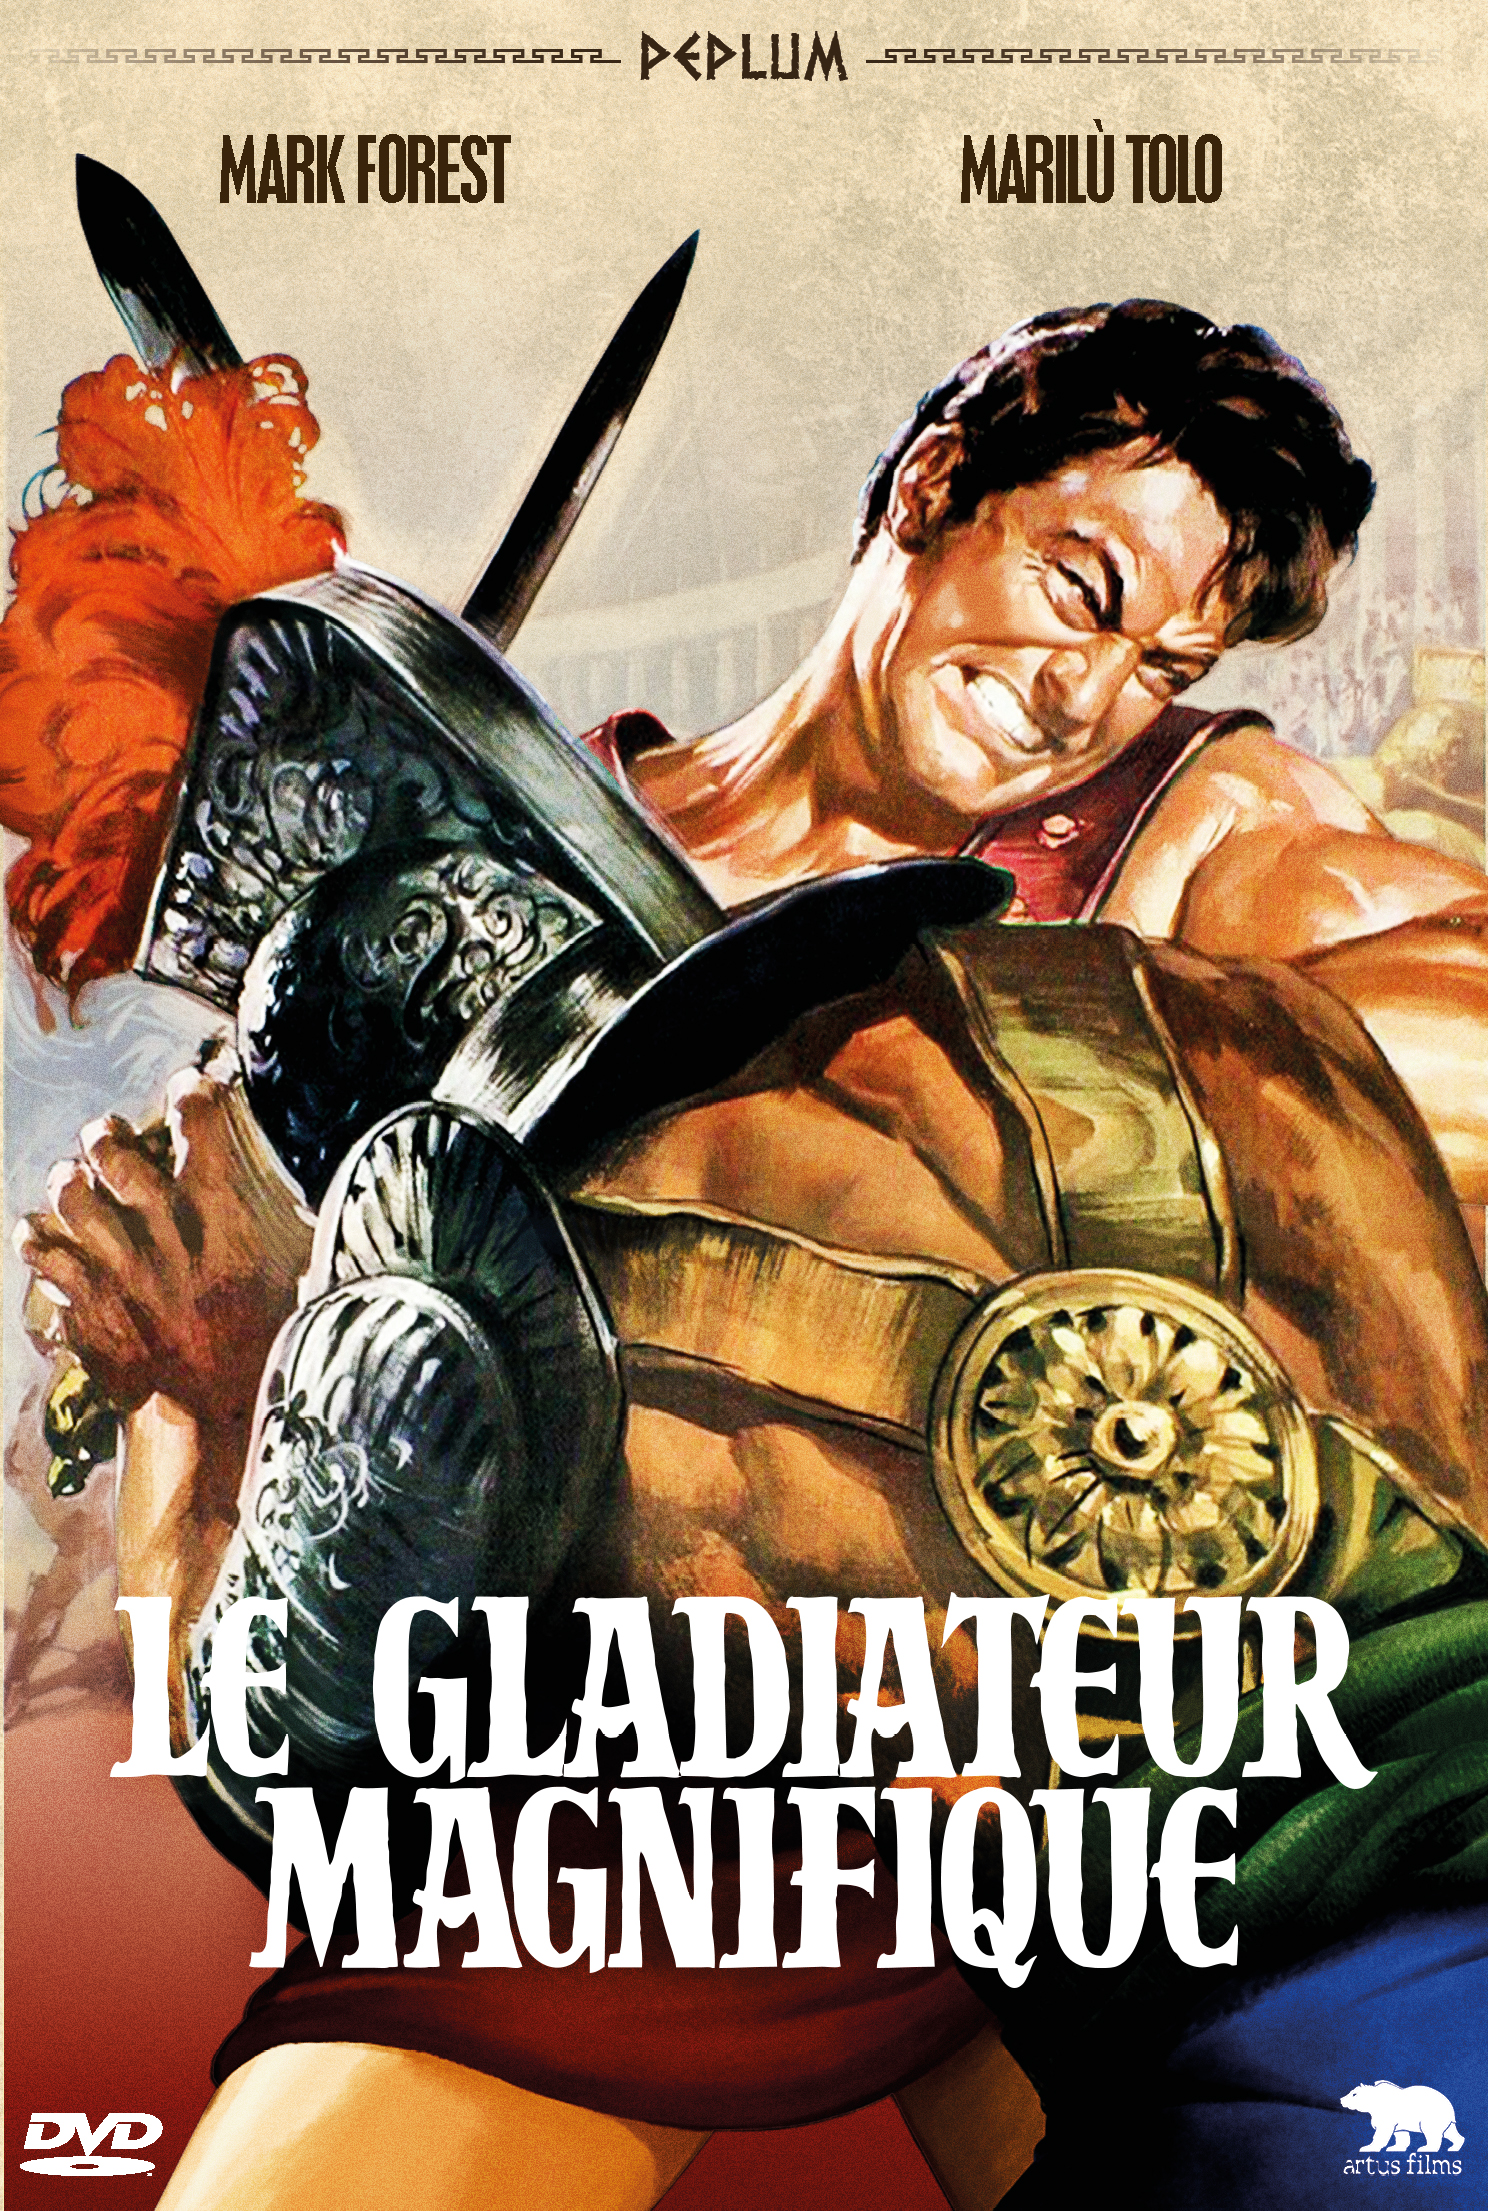 THE MAGNIFICENT GLADIATOR Artus Films DVD… – By The Gods!